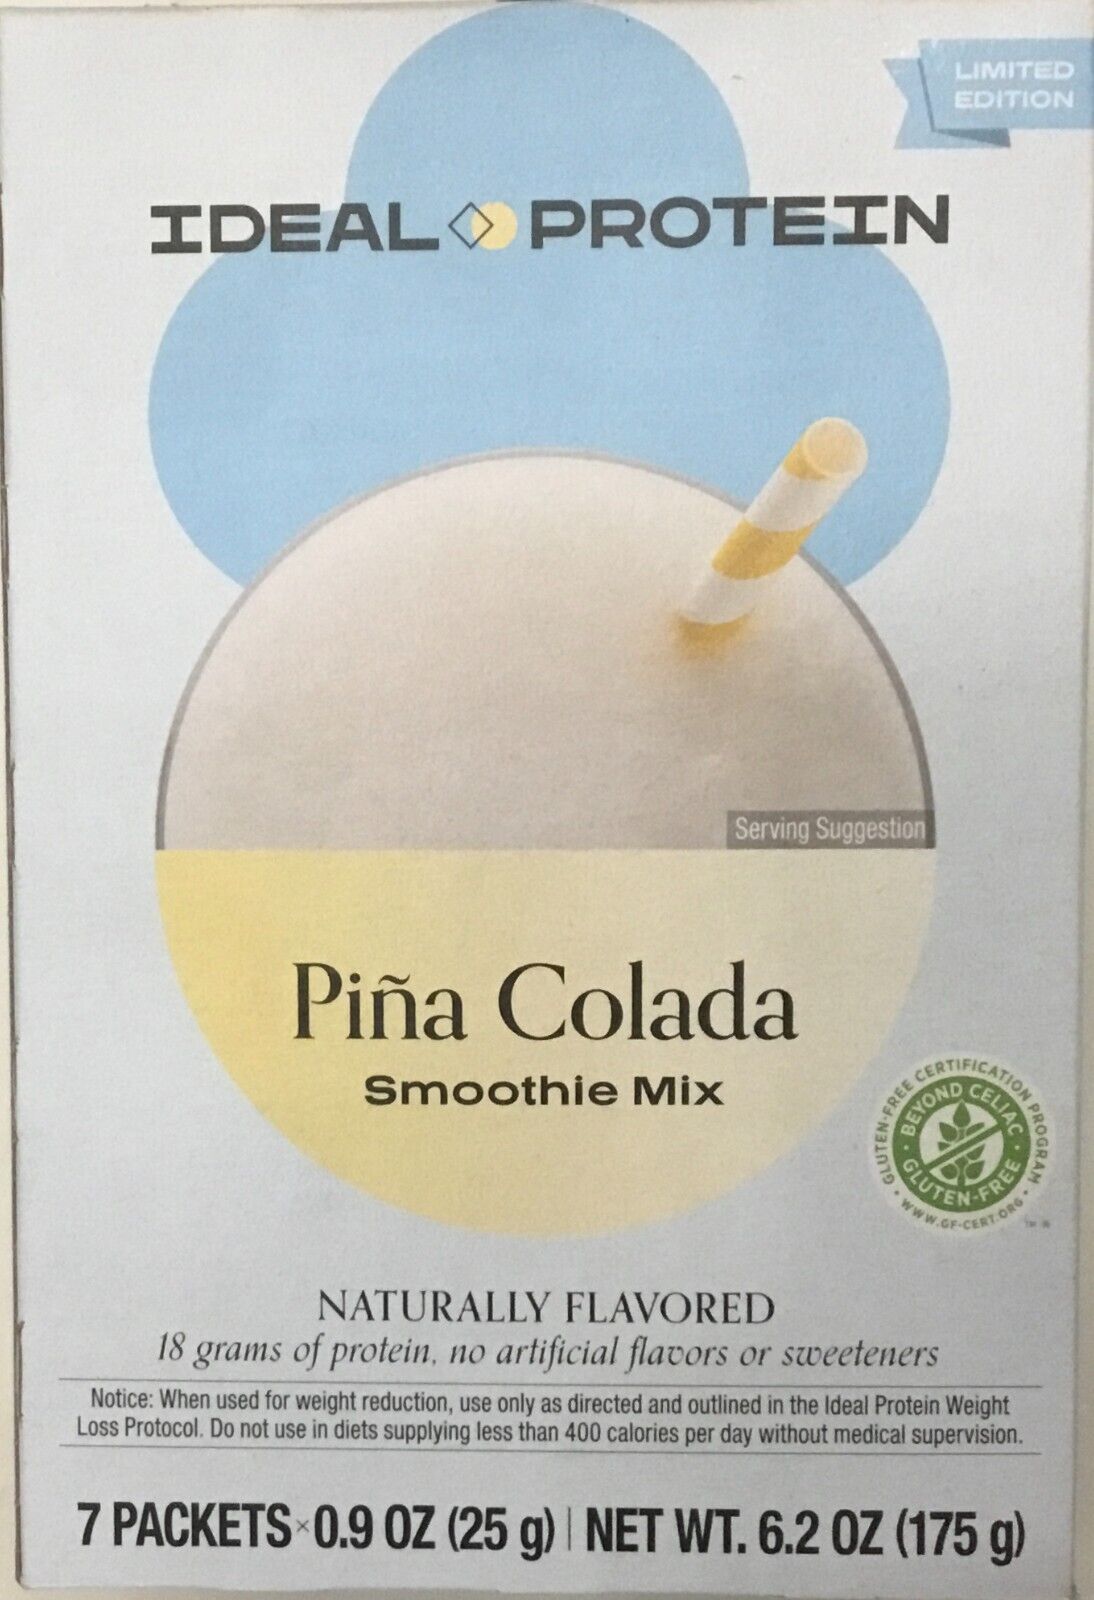 Ideal Protein Piña Colada Smoothie Mix - 7 packets